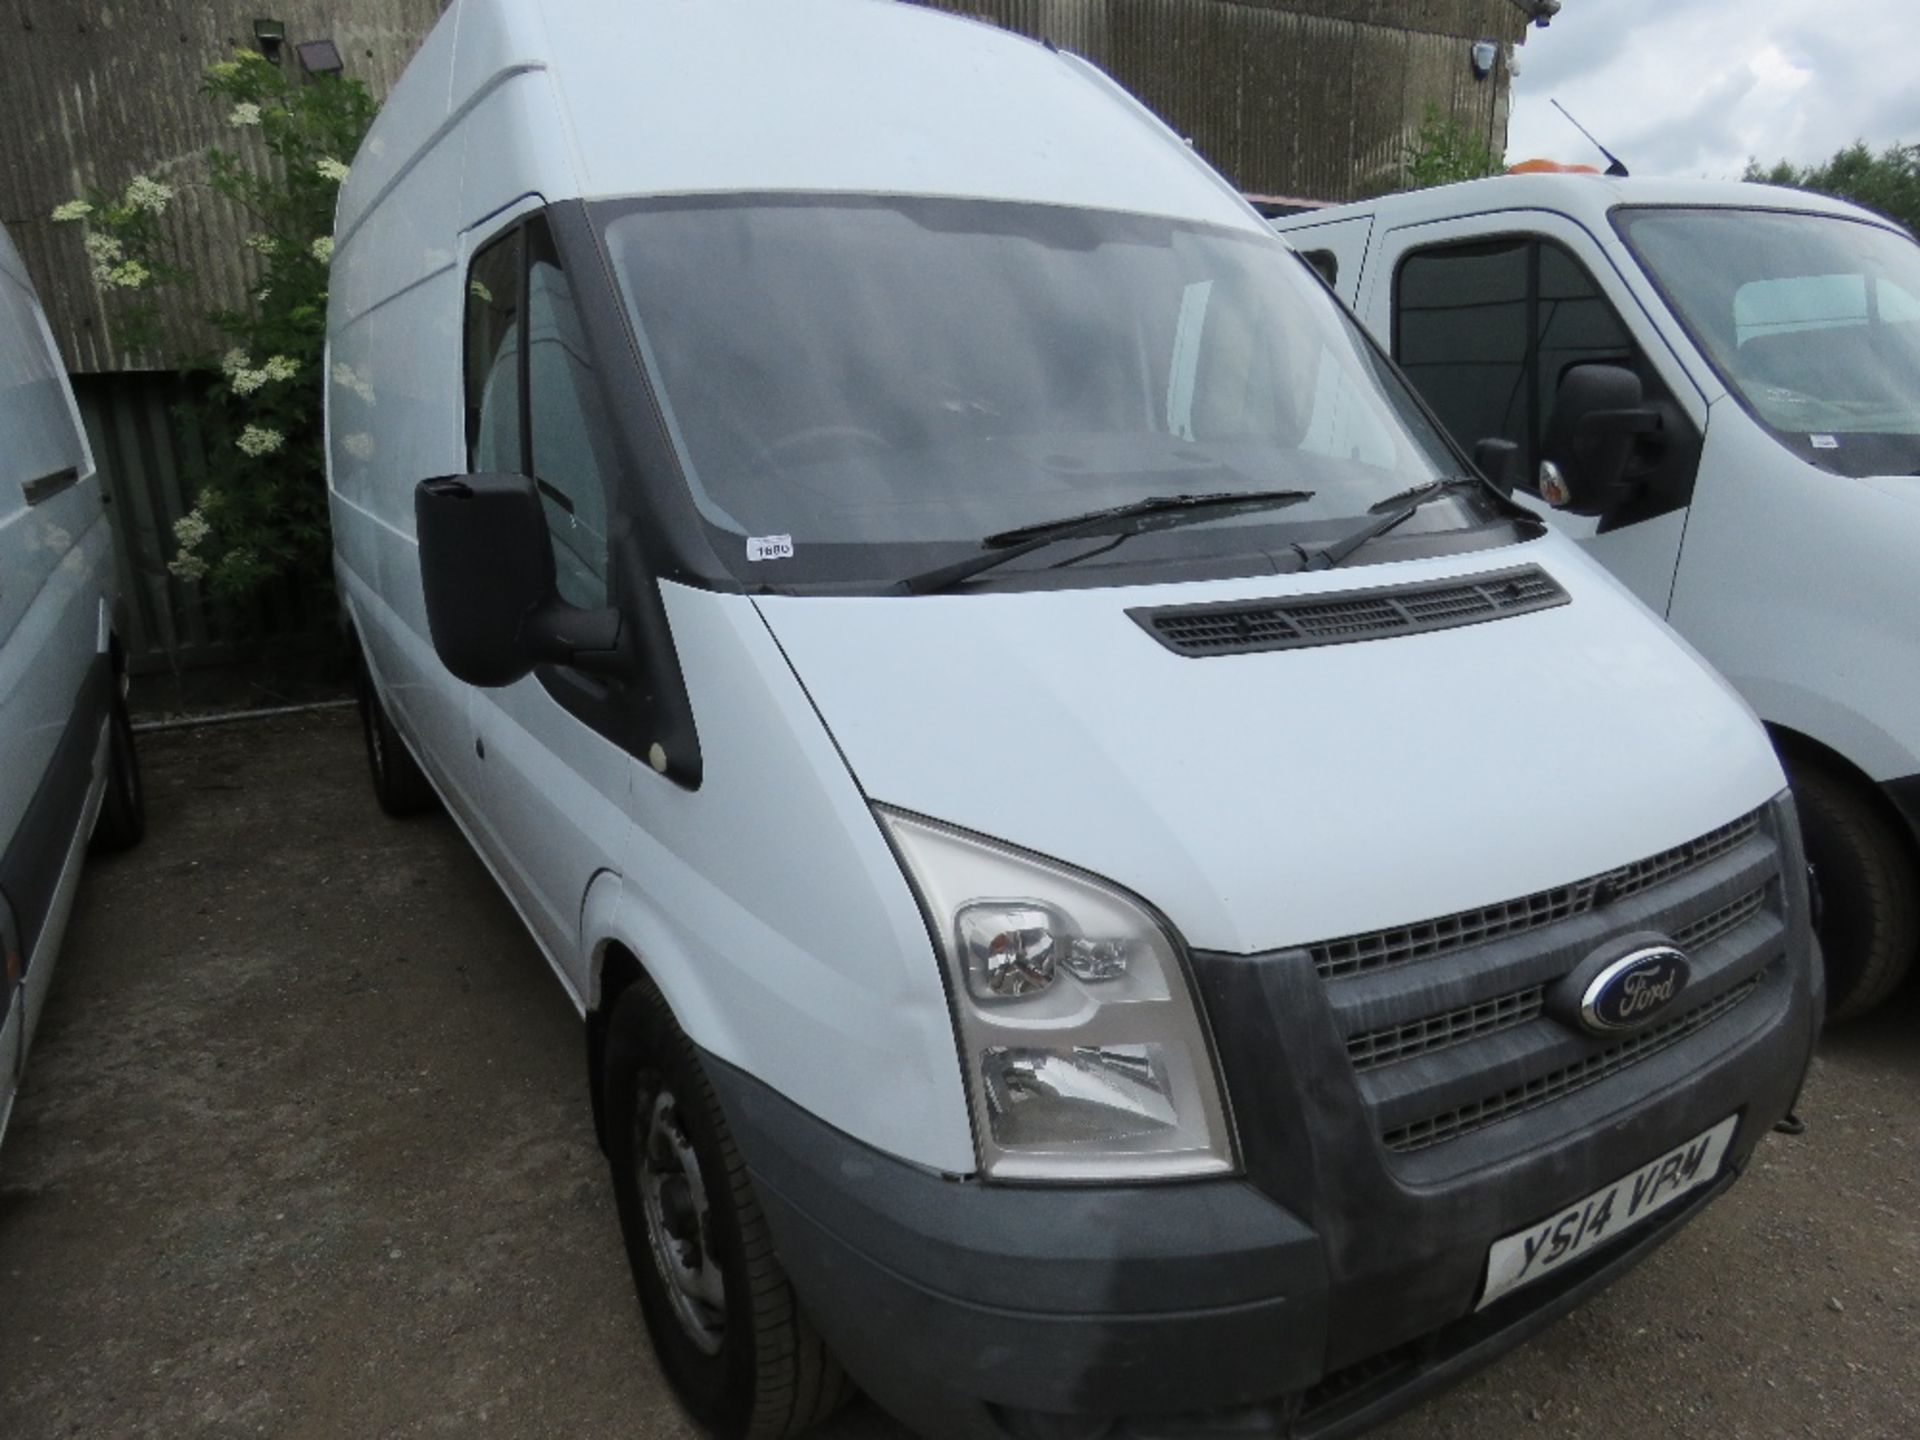 FORD TRANSIT PANEL VAN REG:YS14 VPM WITH ONBOARD COMPRESSOR AND GENERATOR. WITH V5 PLUS MOT TILL MAY